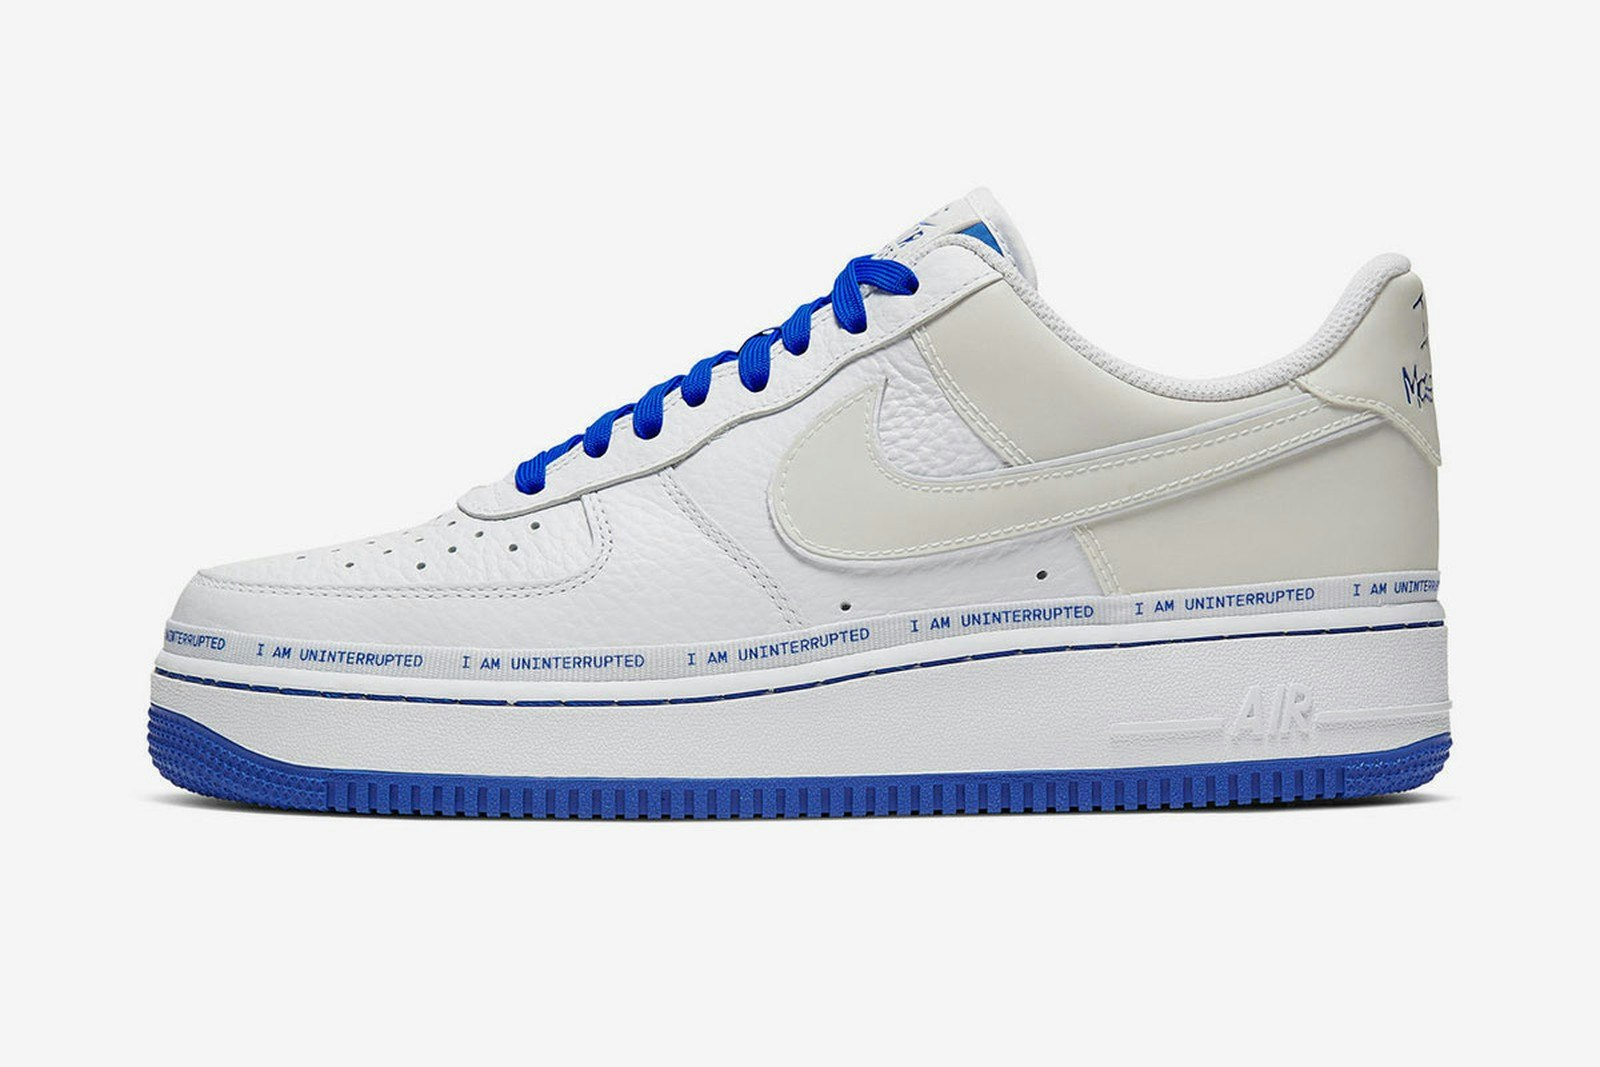 Uninterrupted x Nike Air Force 1 "More Than___"